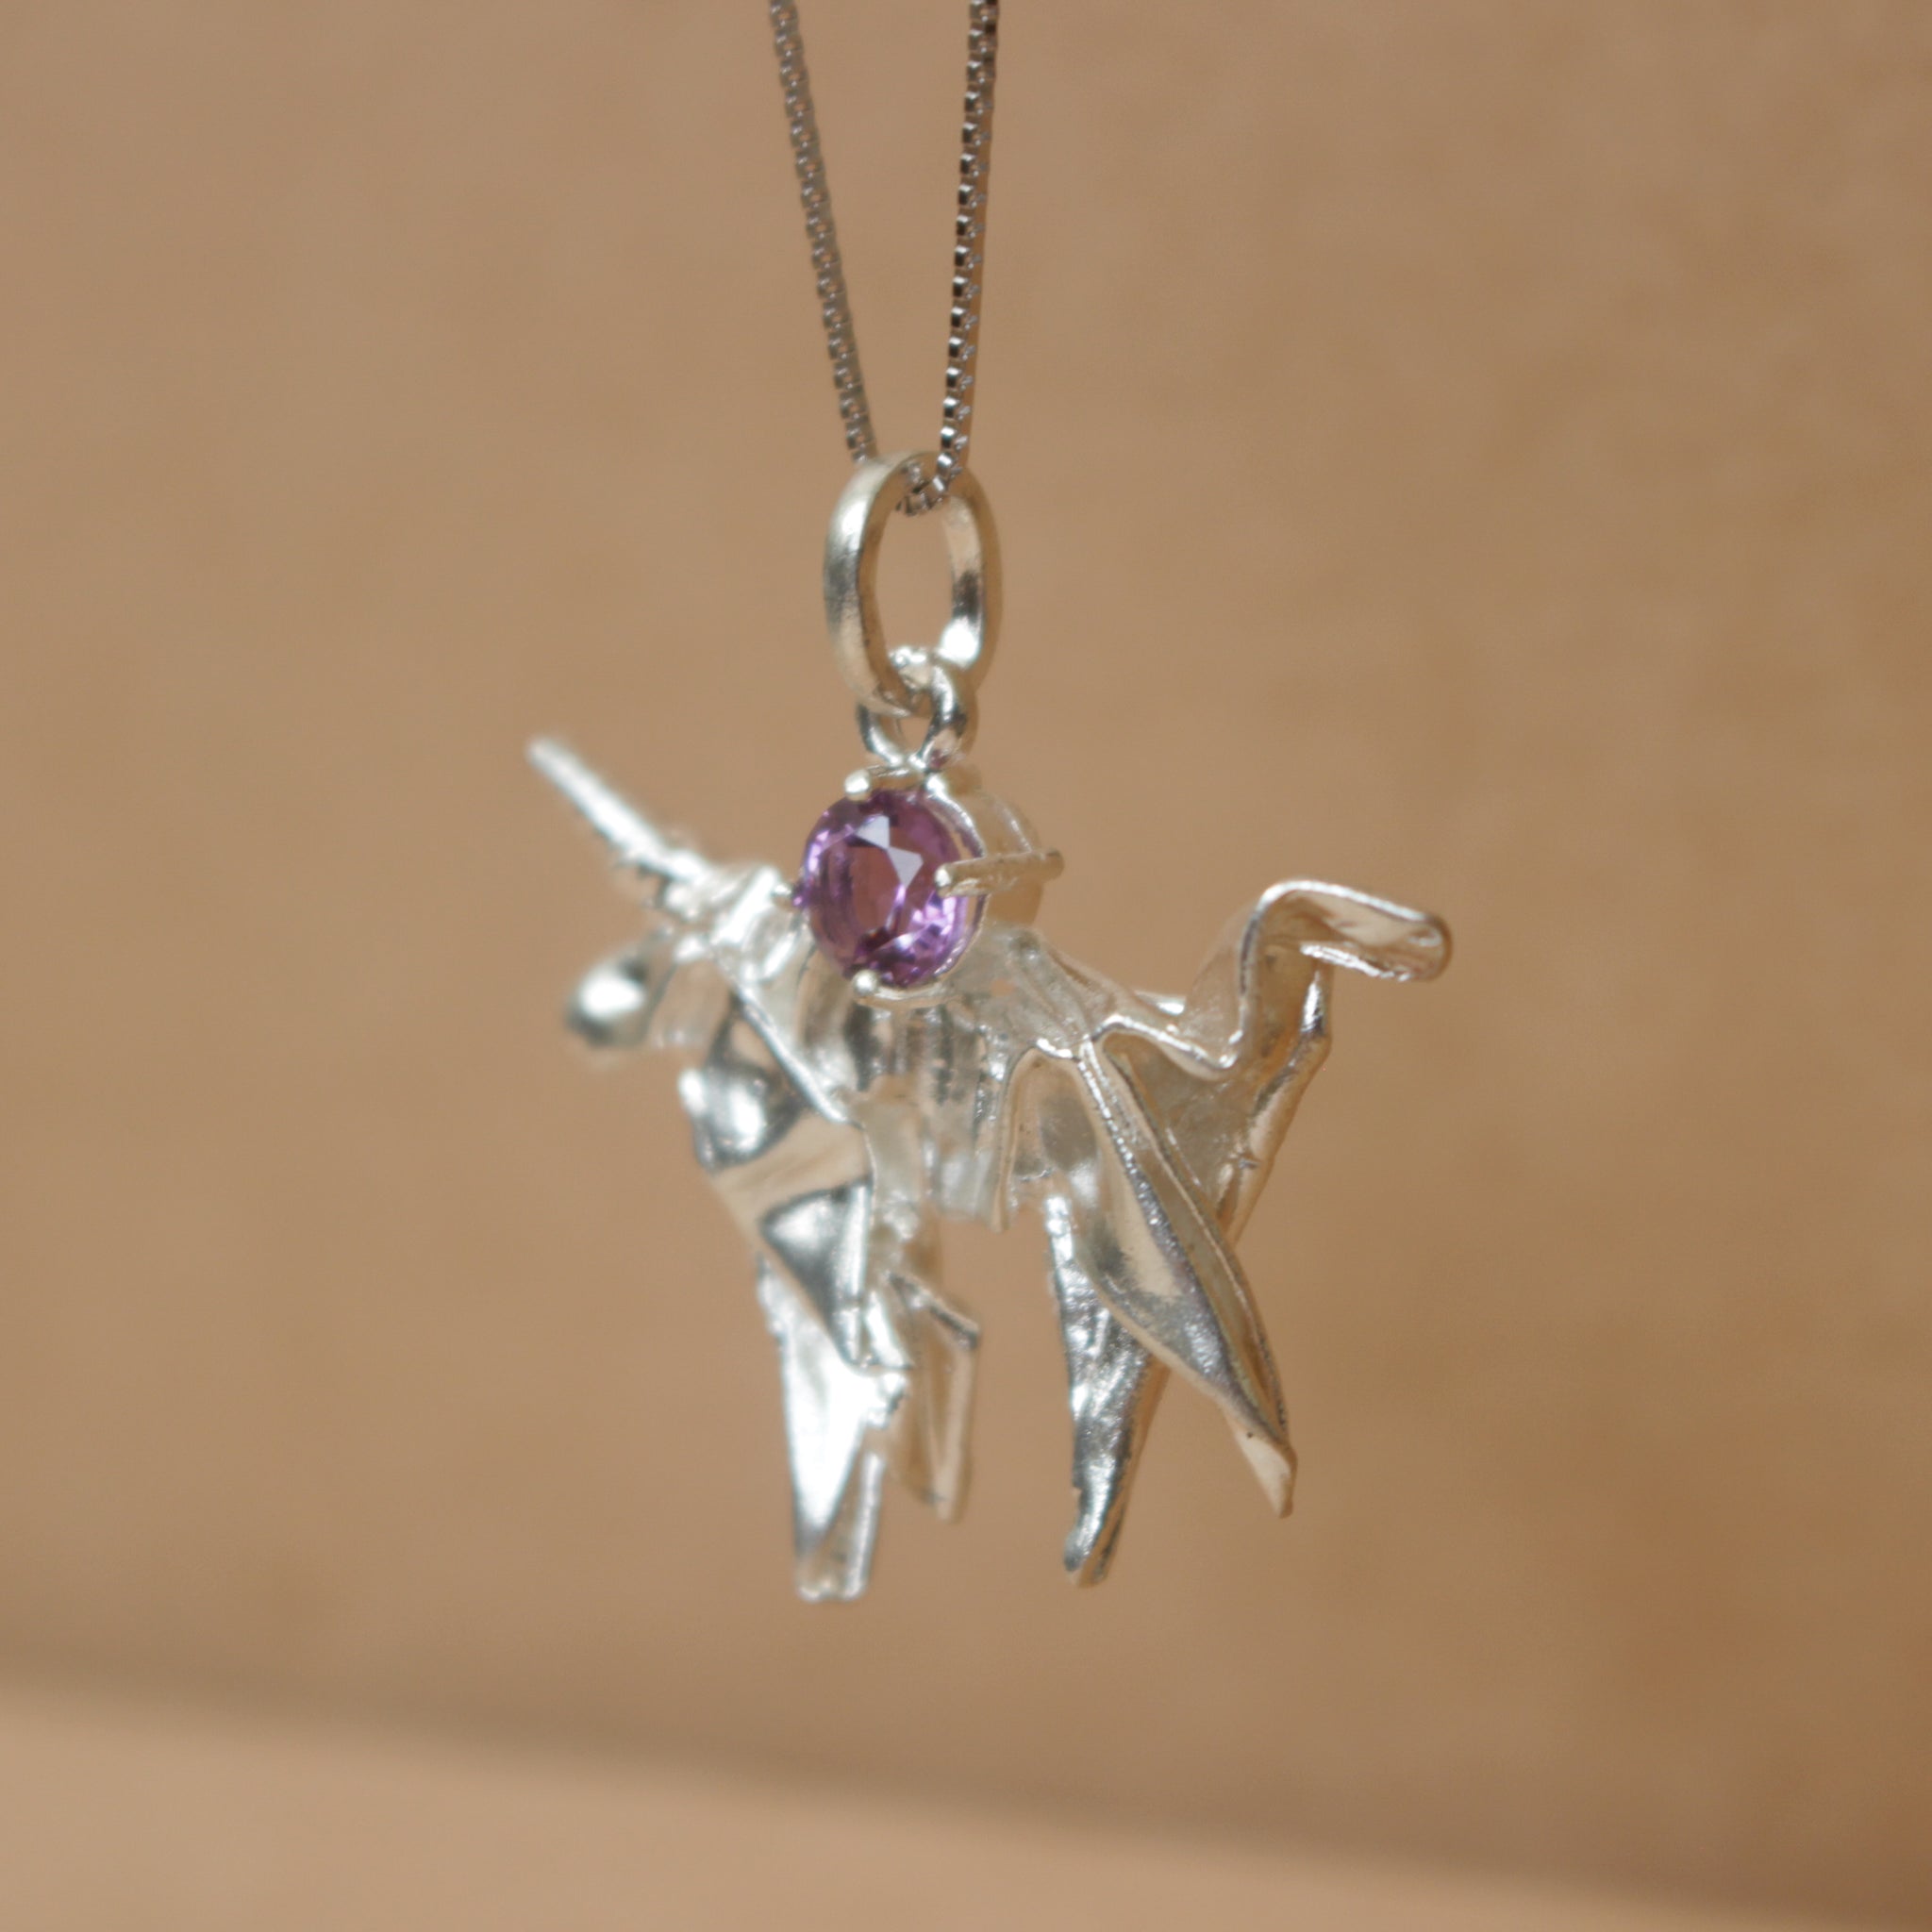 Silver Origami Unicorn Merry-go-round Necklace with Amethyst